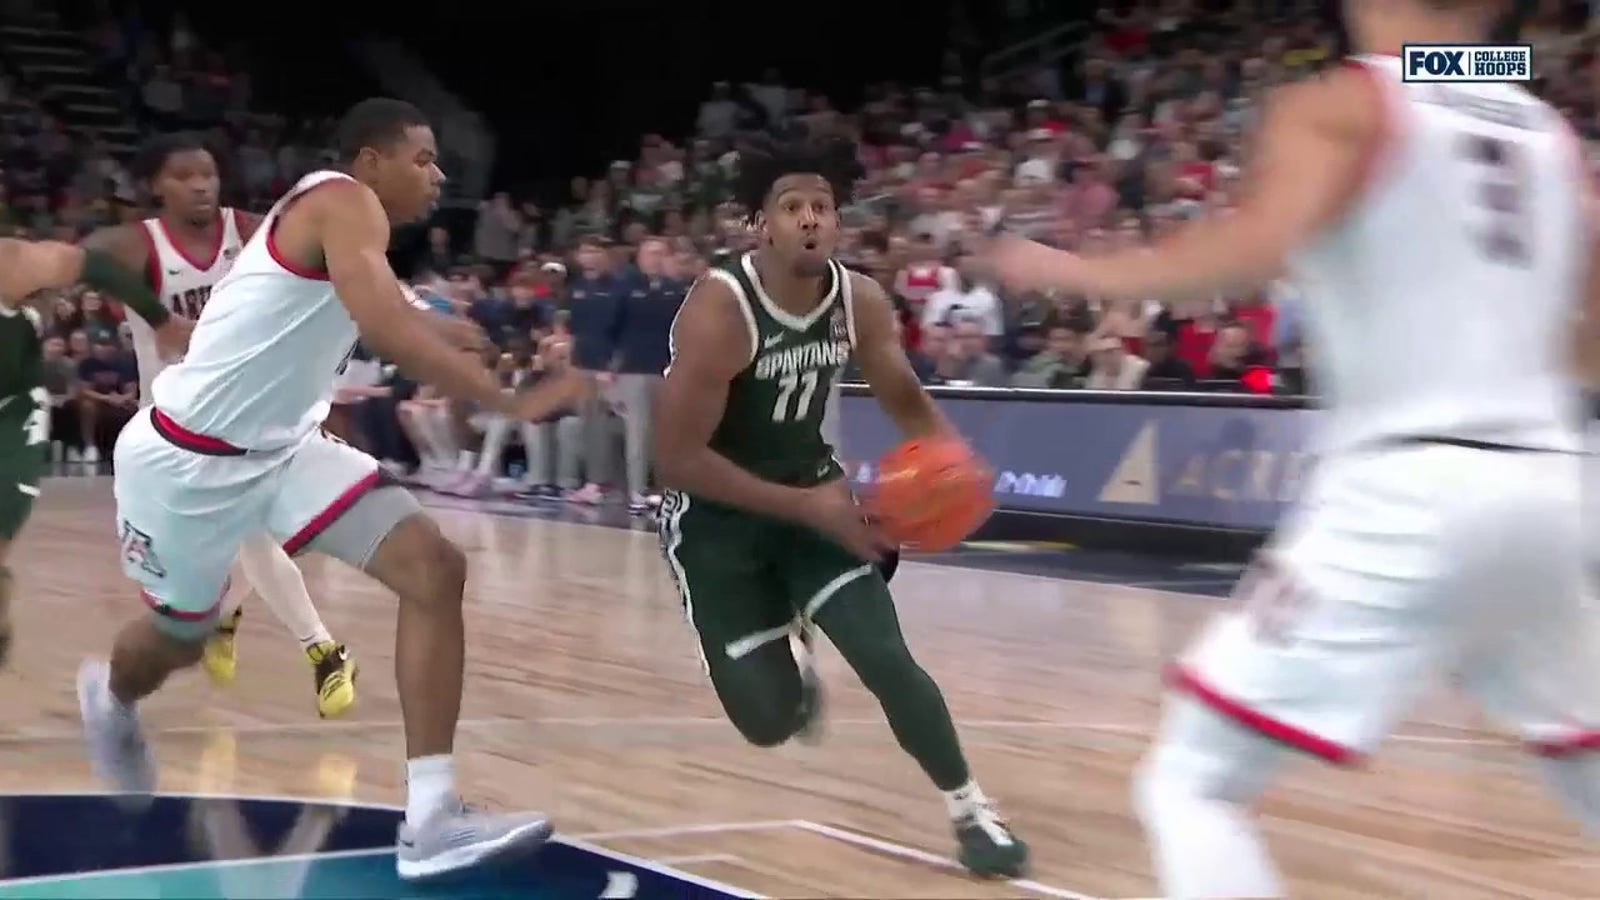 A.J. Hoggard sinks the layup to give Michigan State the lead against Arizona